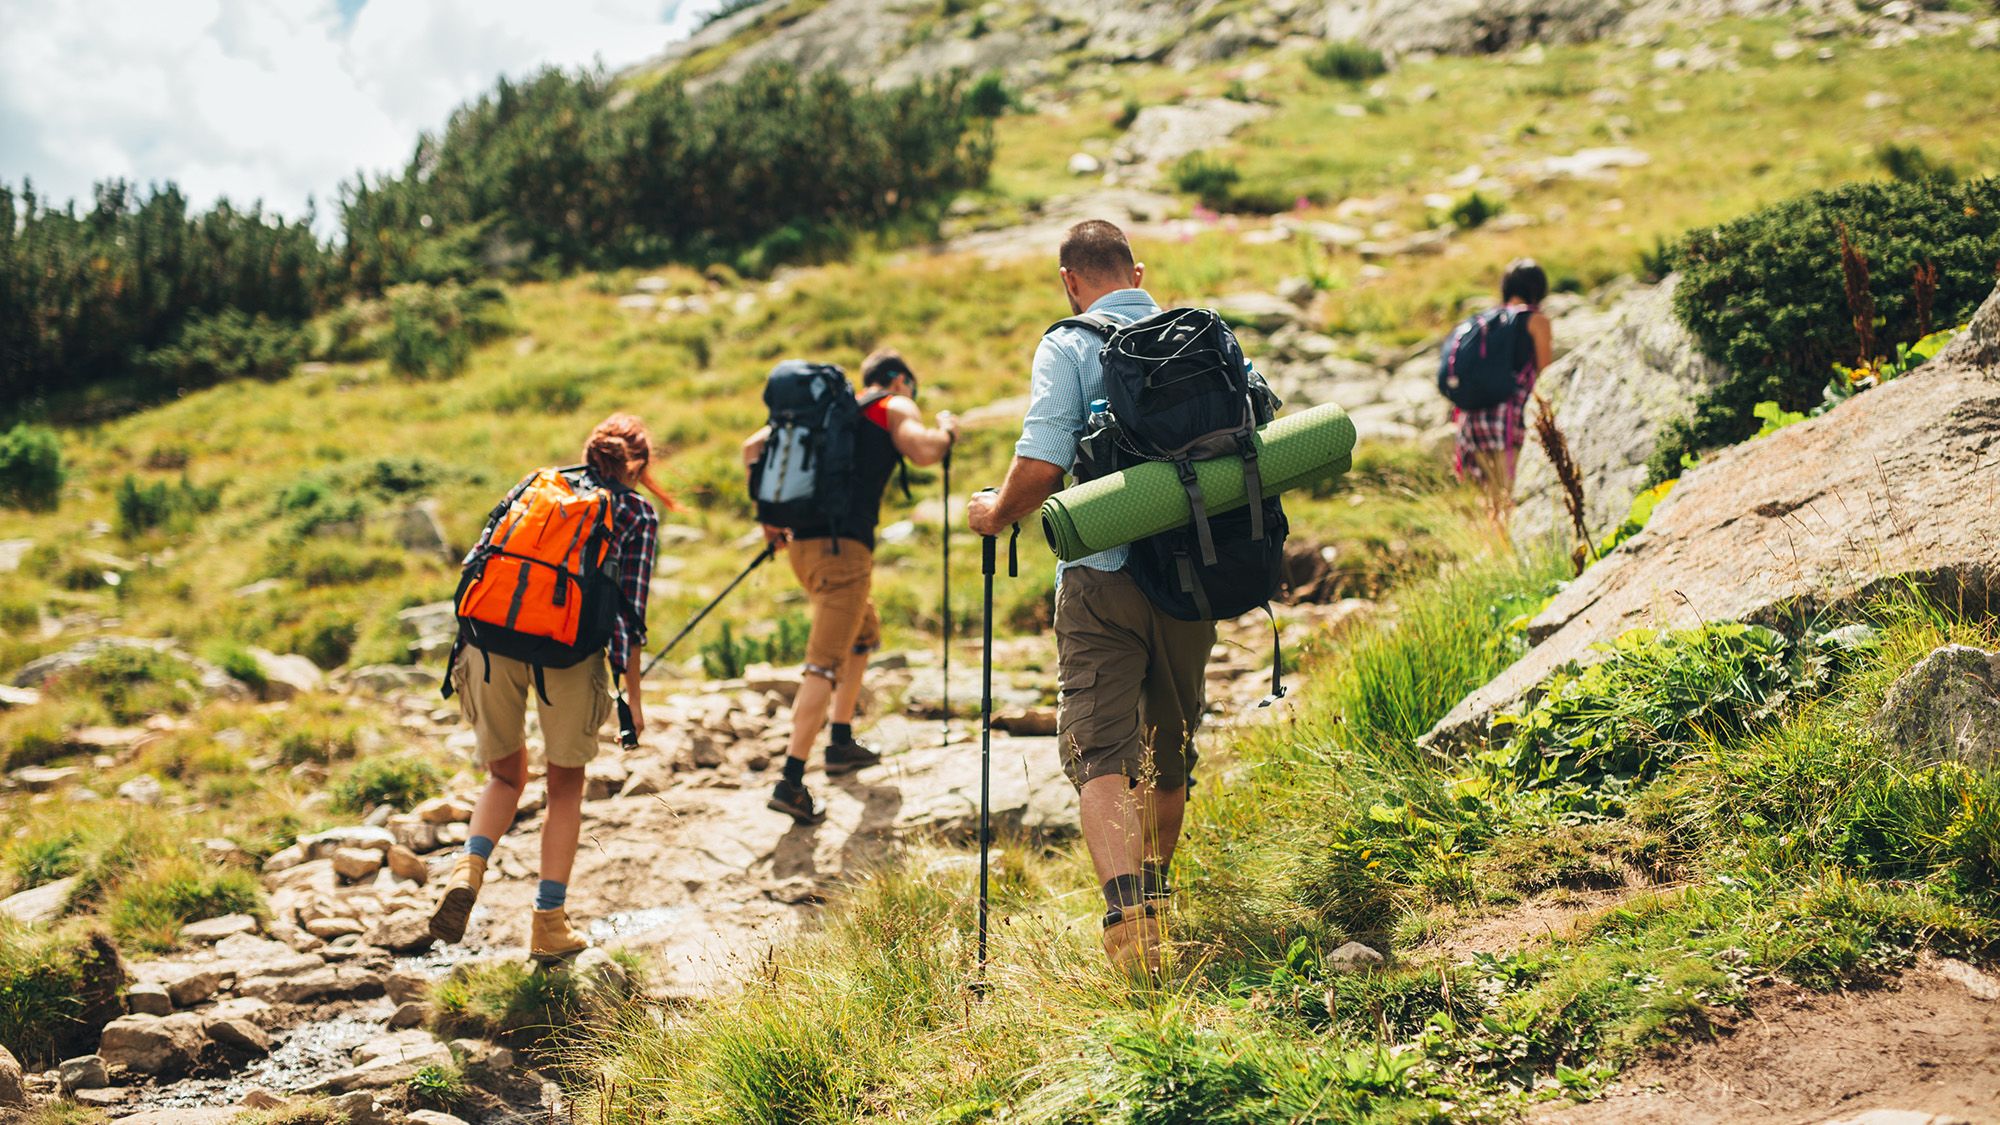 Your beginners guide to backpacking in the wilderness